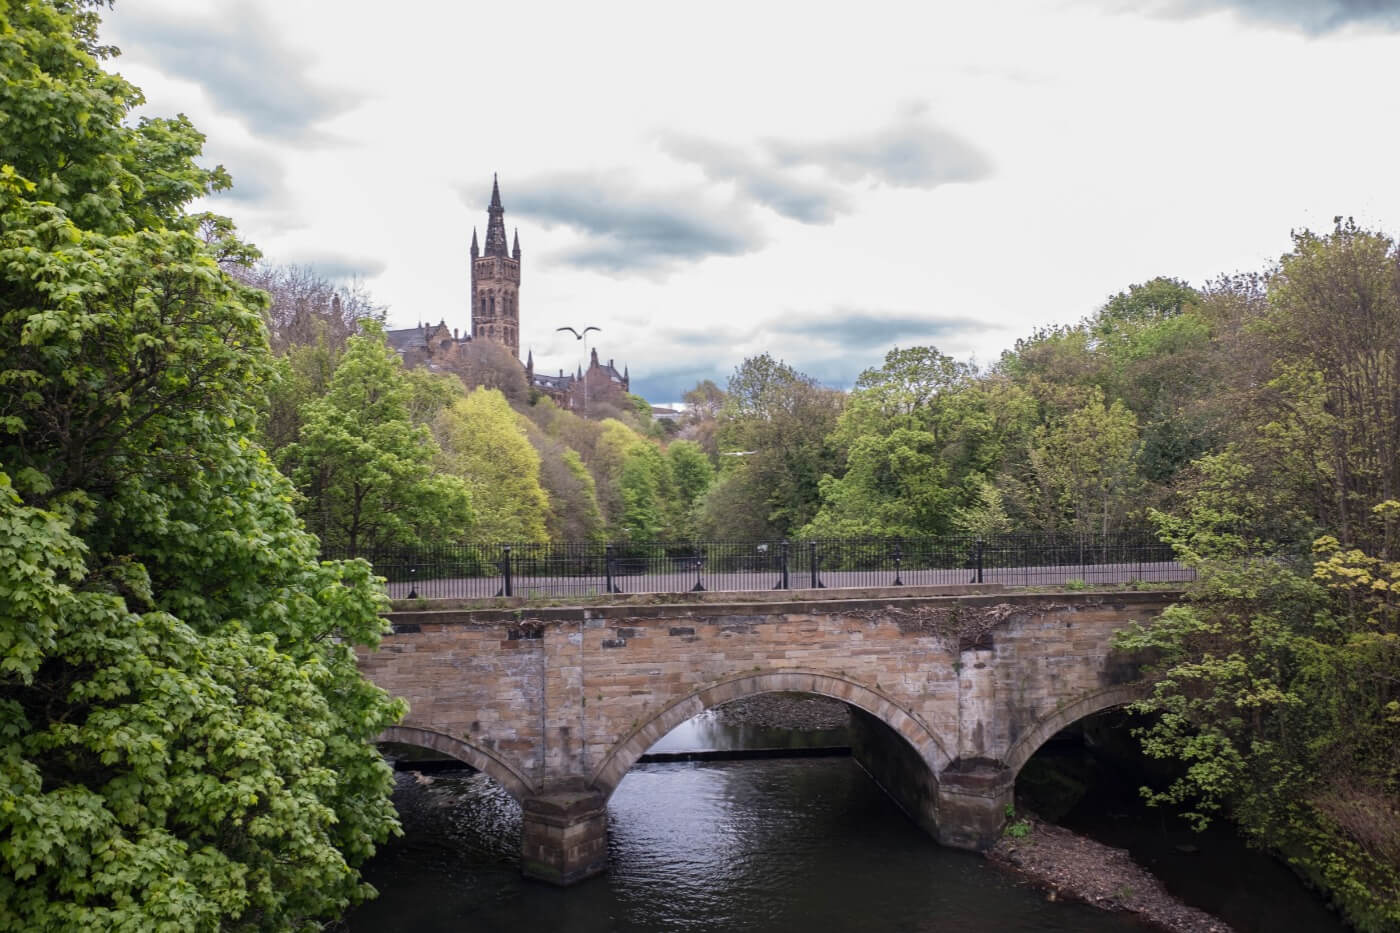 Student Accommodation in Finnieston, Glasgow - view of the University of Glasgow over the River Kelvin from Finnieston